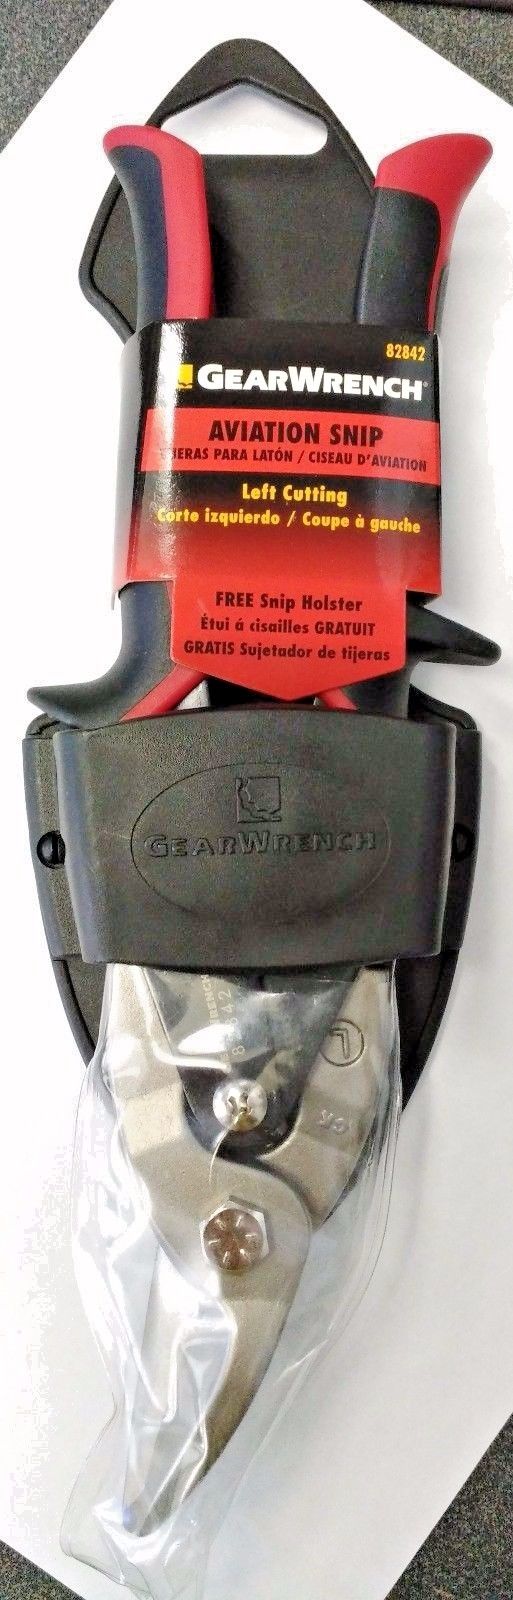 Gearwrench 82842 Left Cutting Aviation Snip With Free Snip Holster